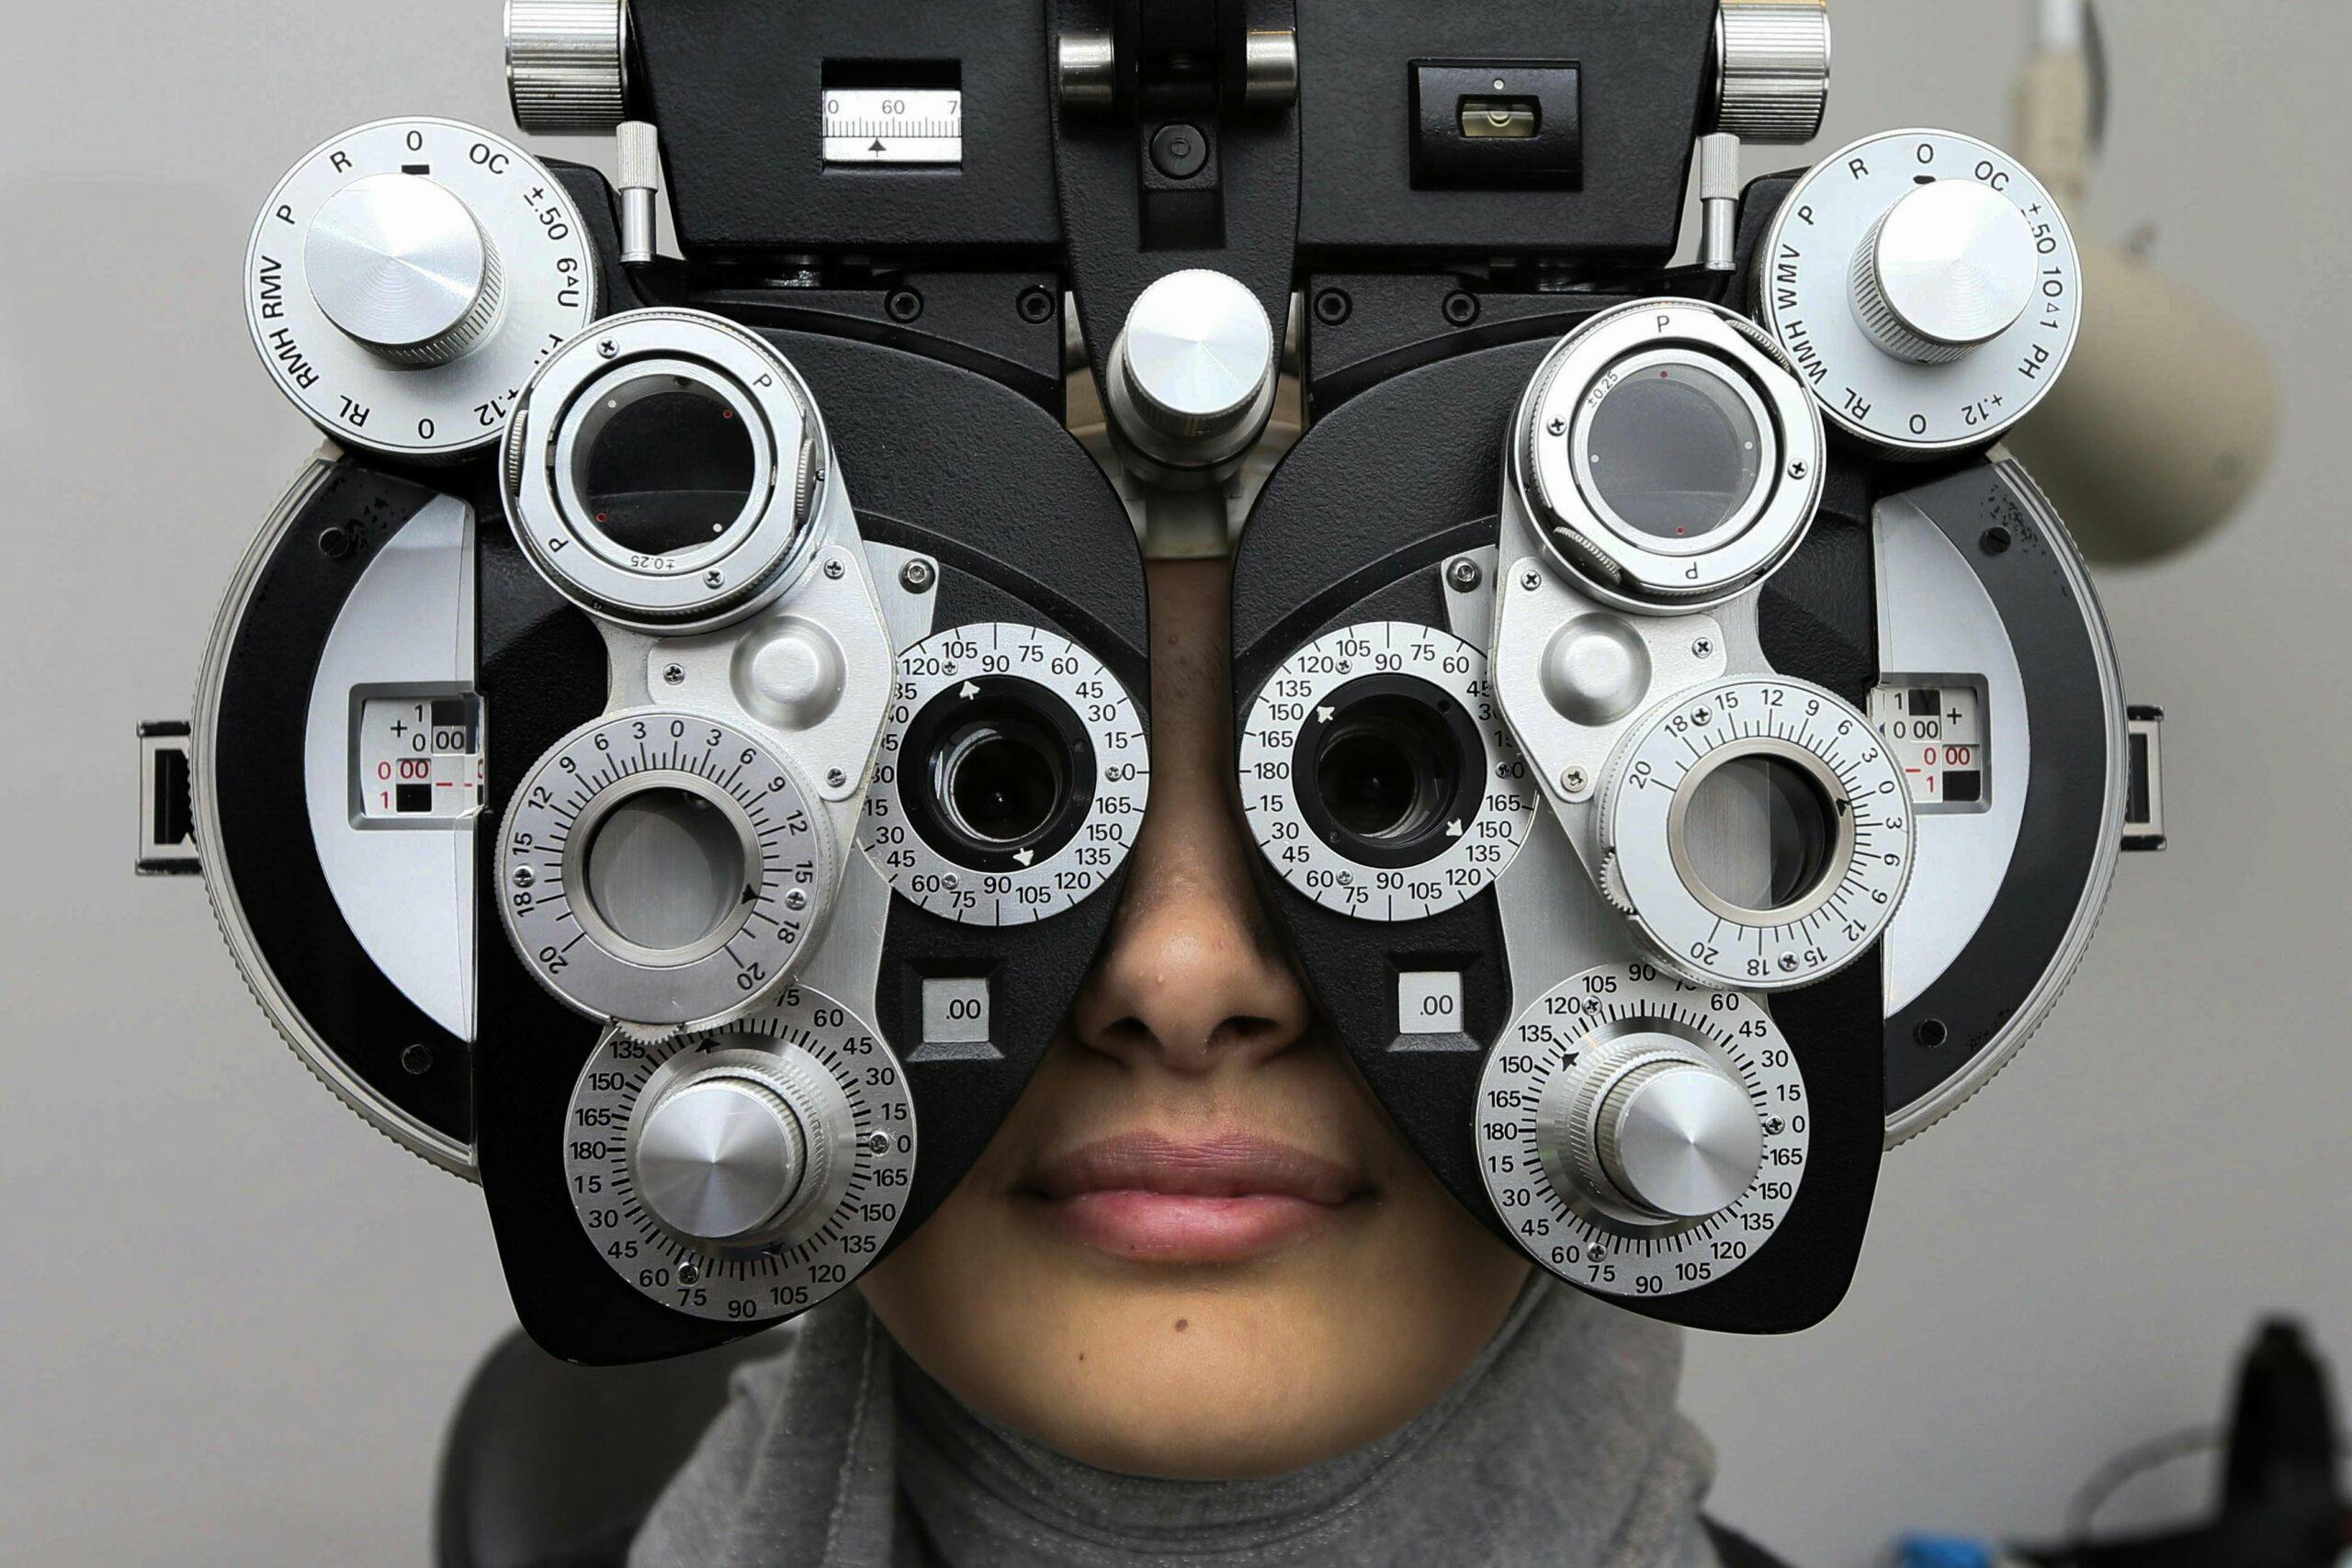 Optometrists say they will withdraw OHIP-covered services starting Wednesday after talks break down with province